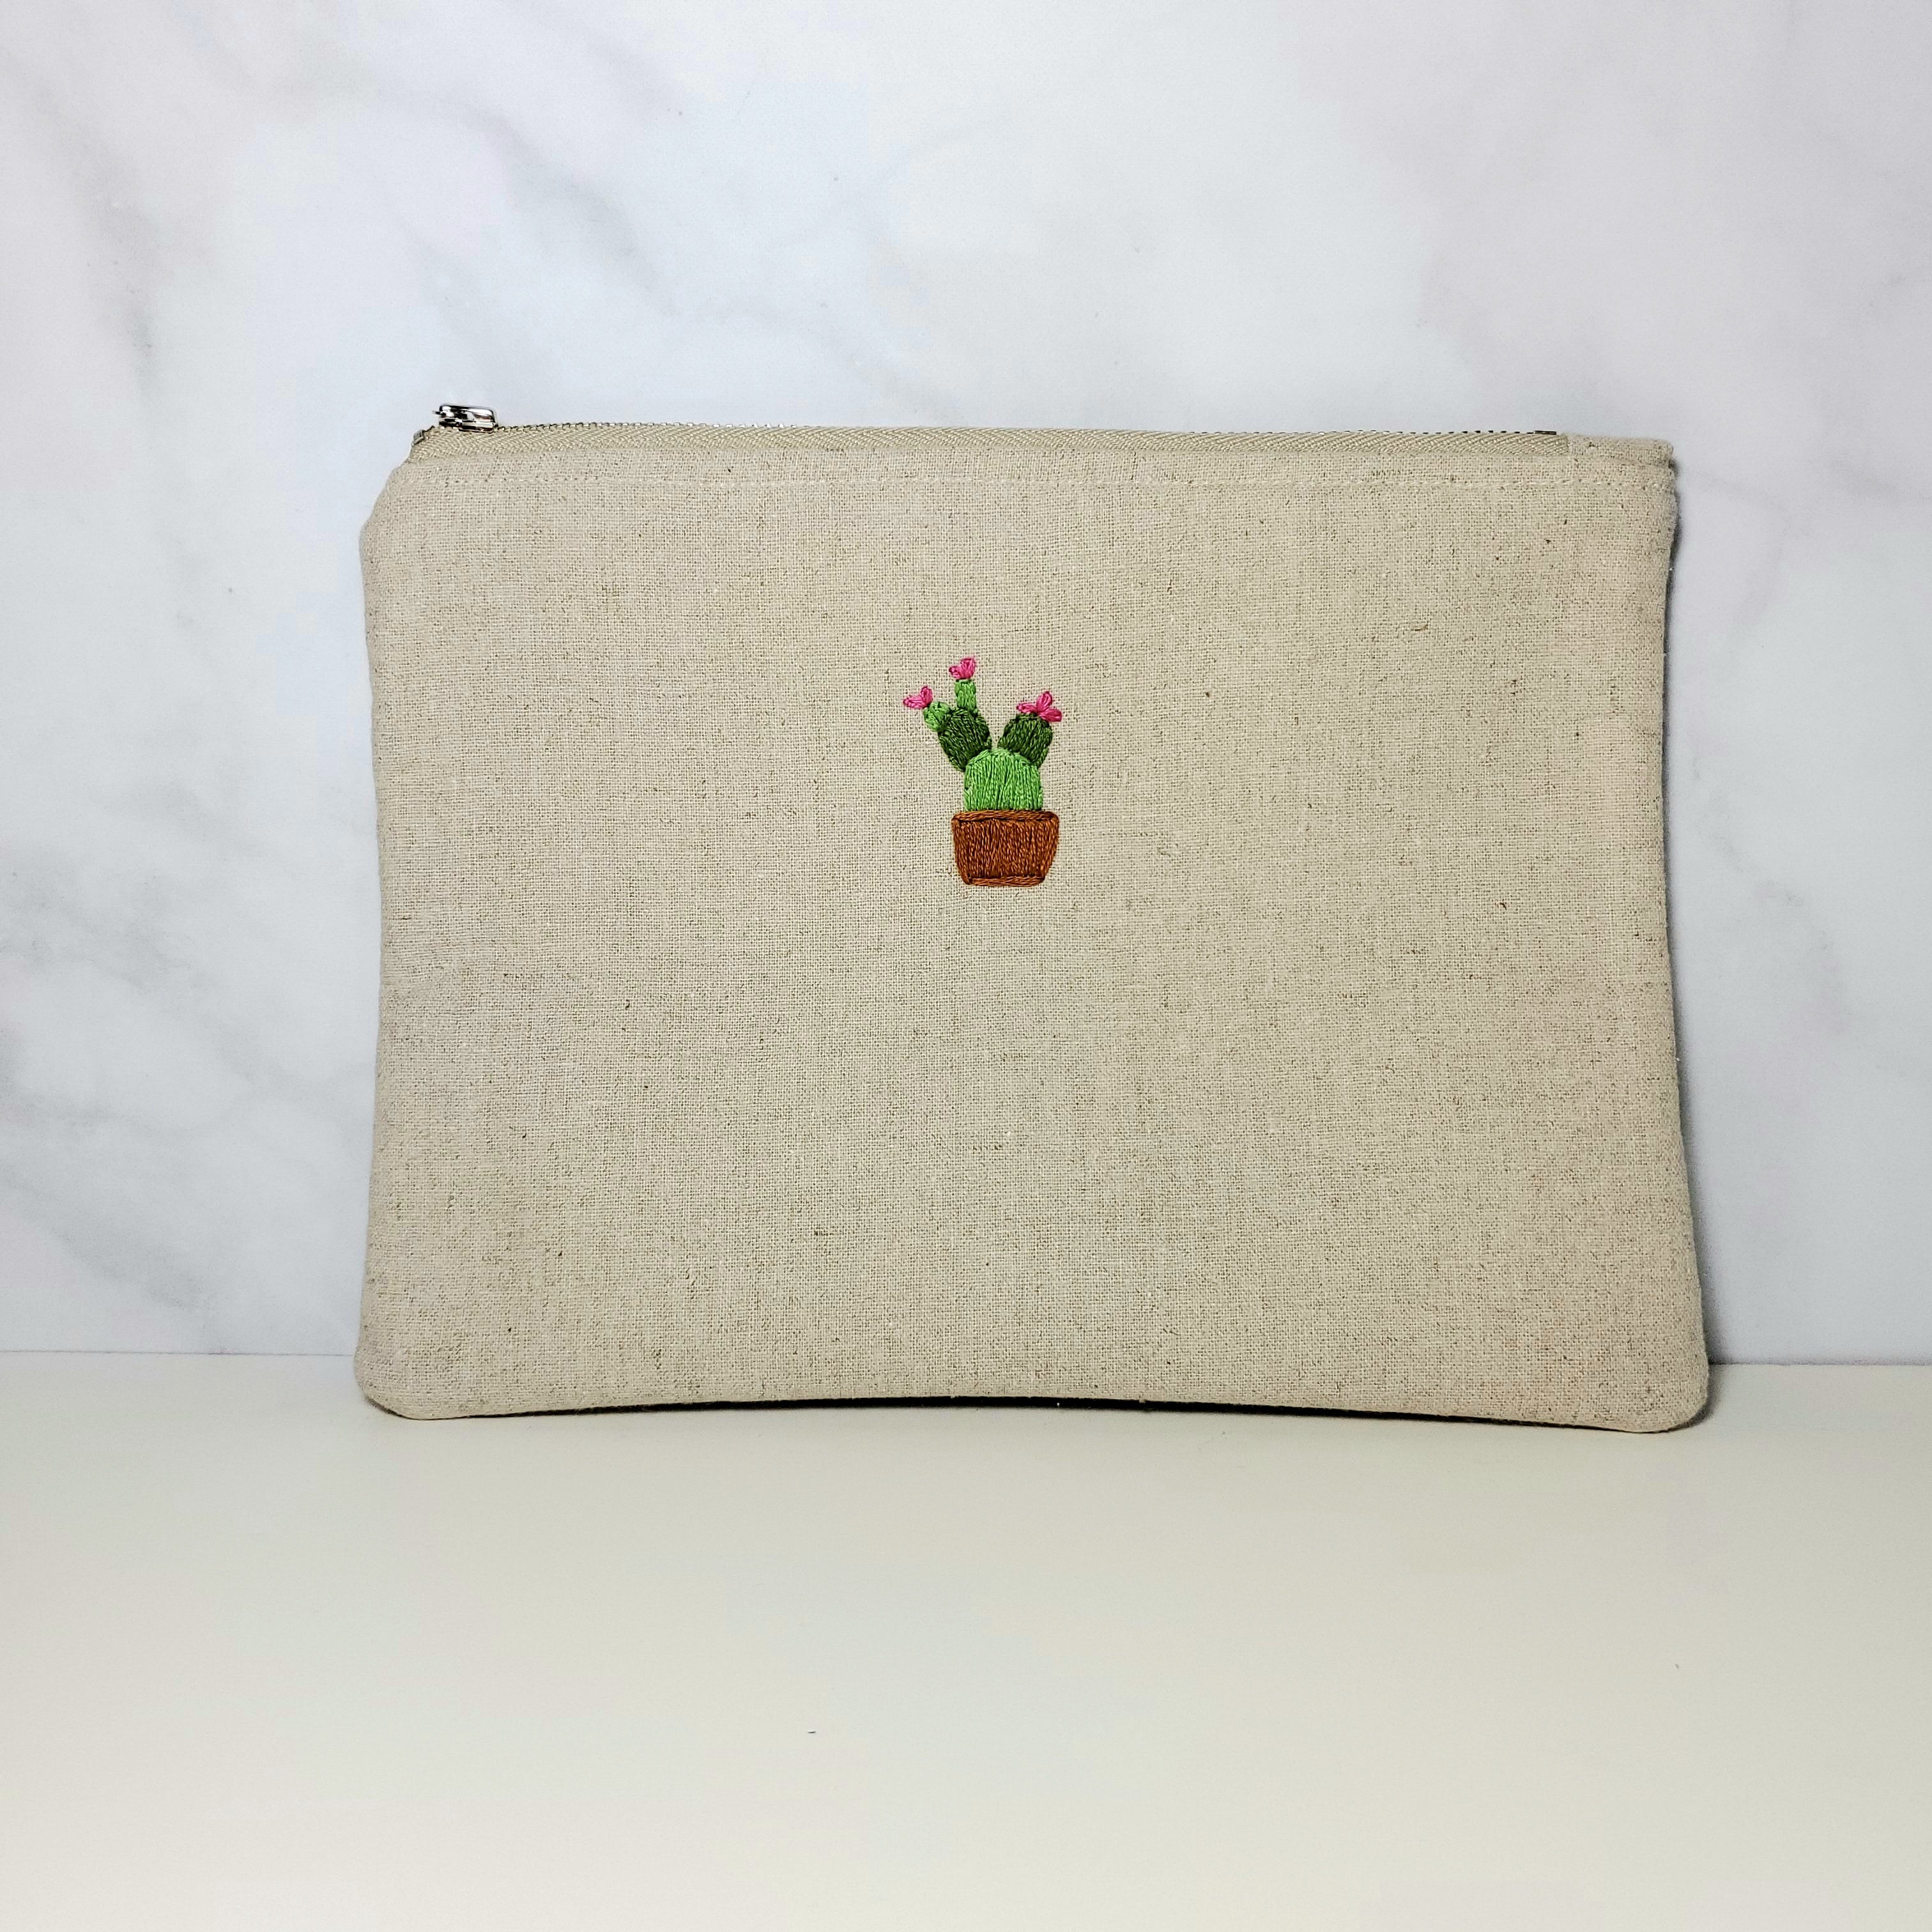 Hand Embroidered Zipper Pouch - Cactus (D)